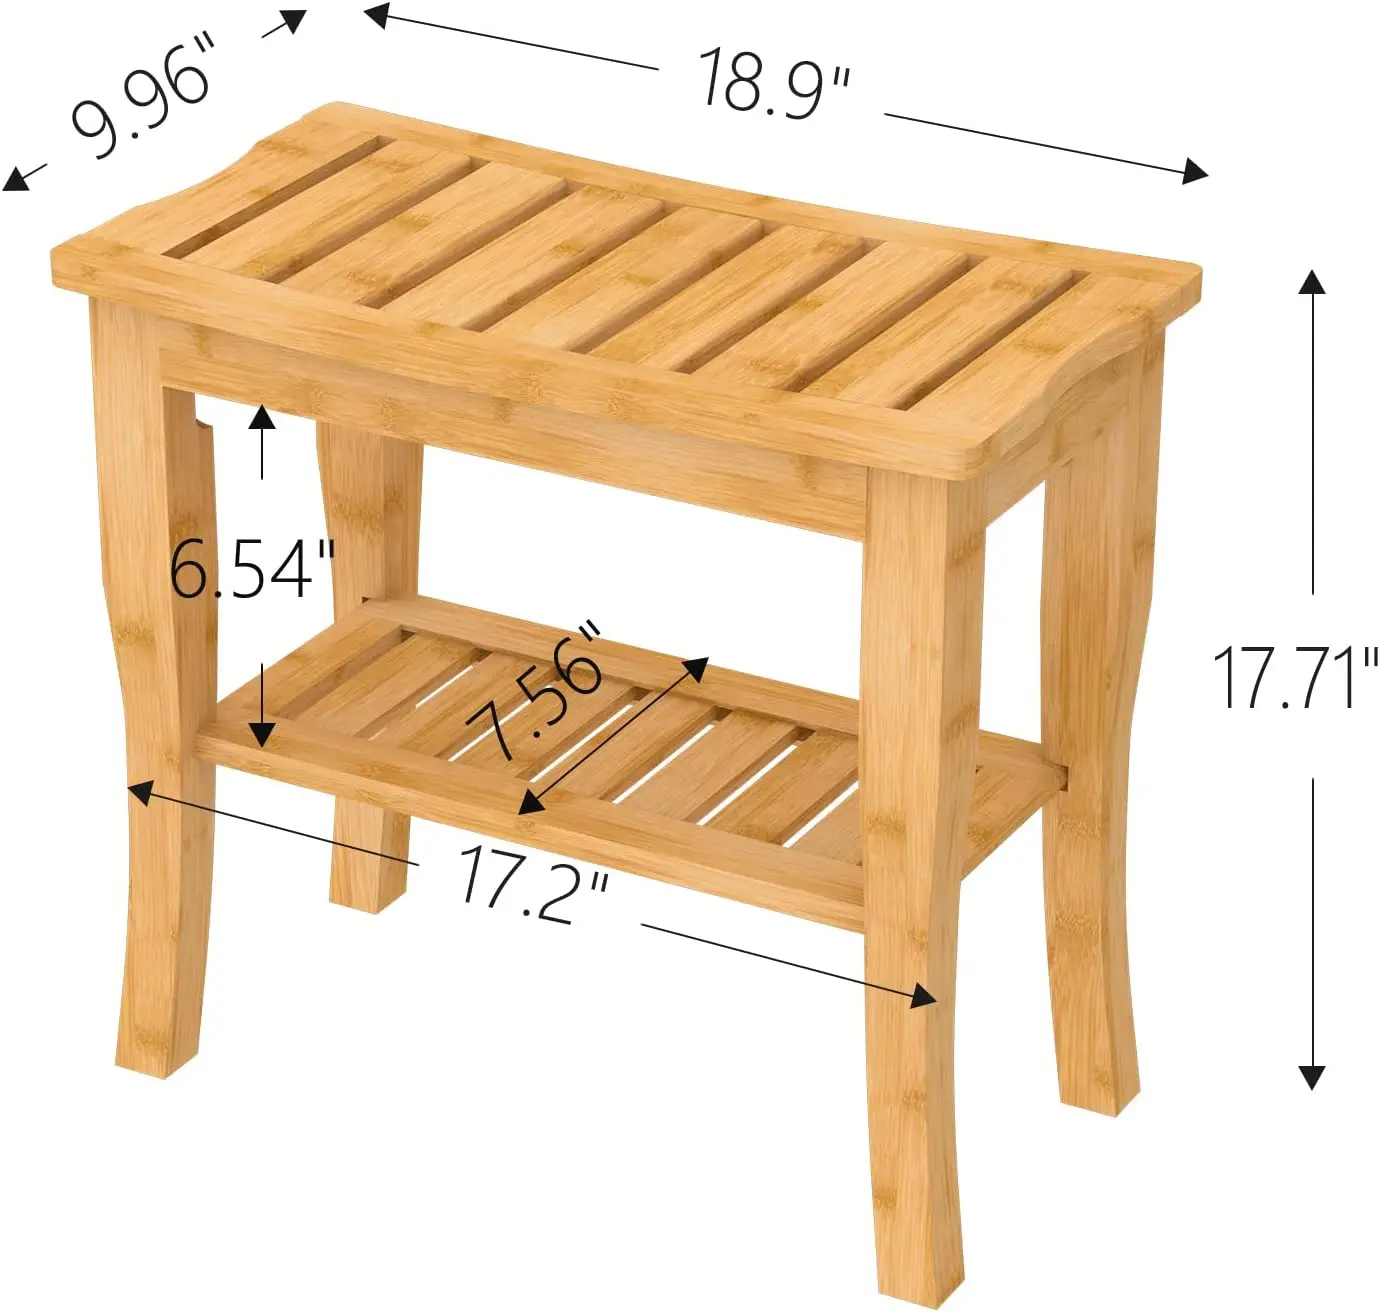 Bamboo Shower Bench Wood Shower Bench with Storage Shelf for Inside Shower